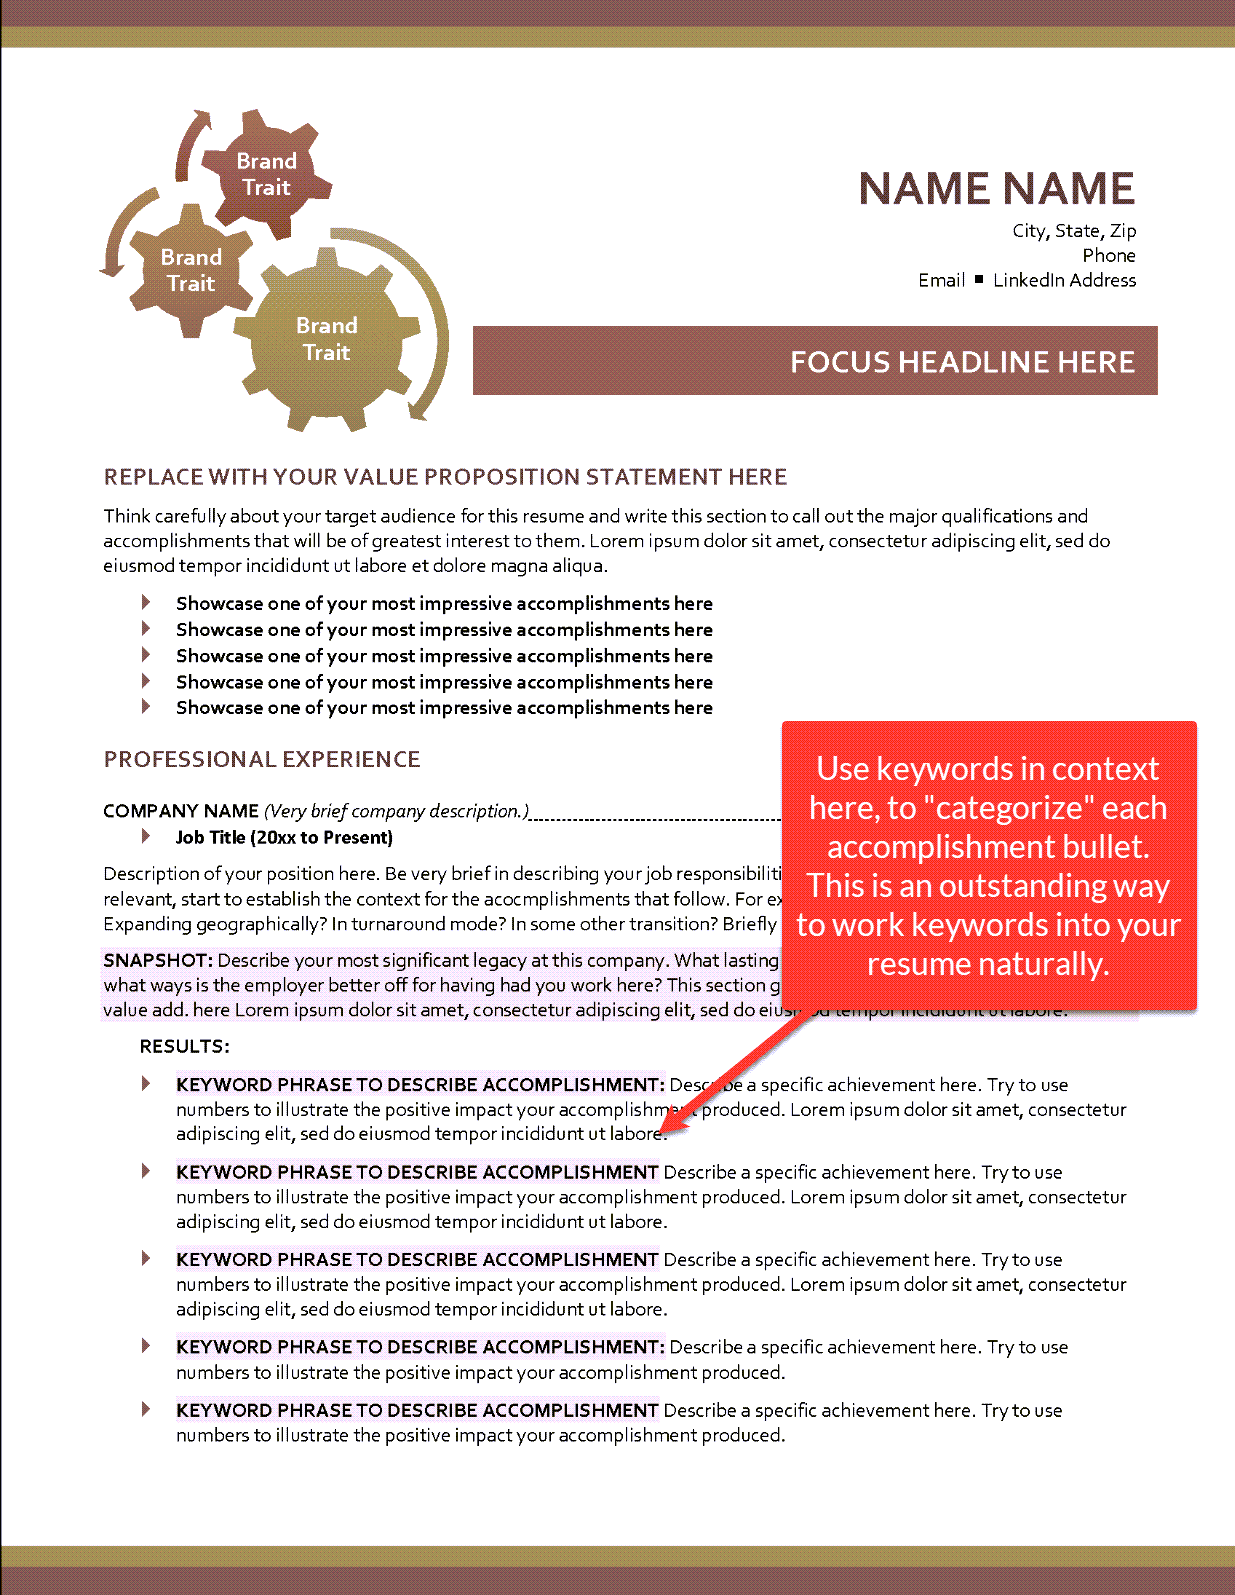 Include Keywords in Your Resume Template Example 2